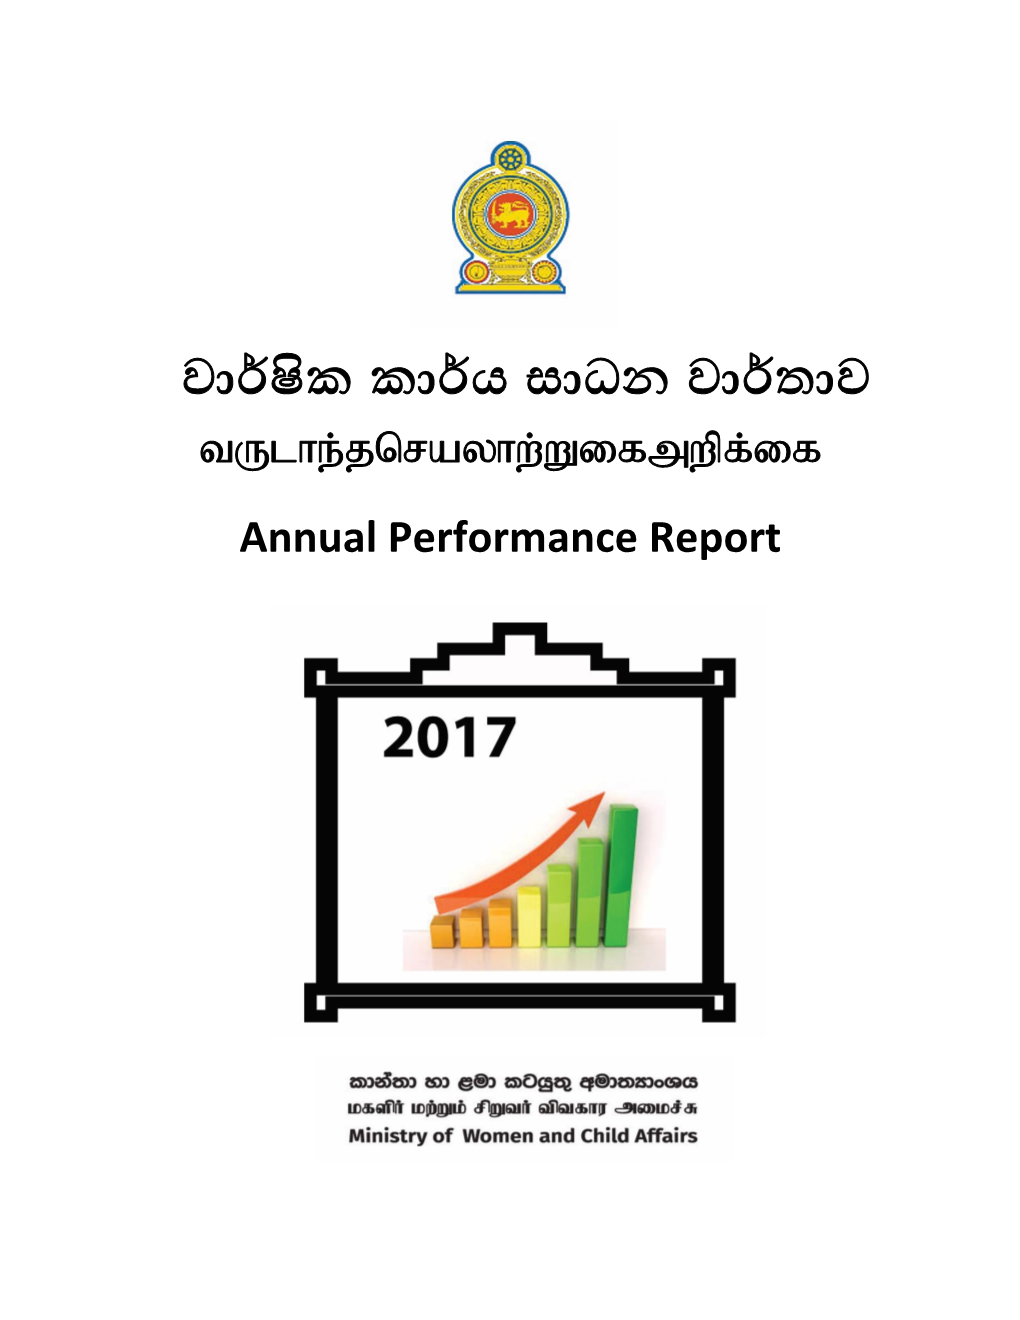 Annual Performance Report of The